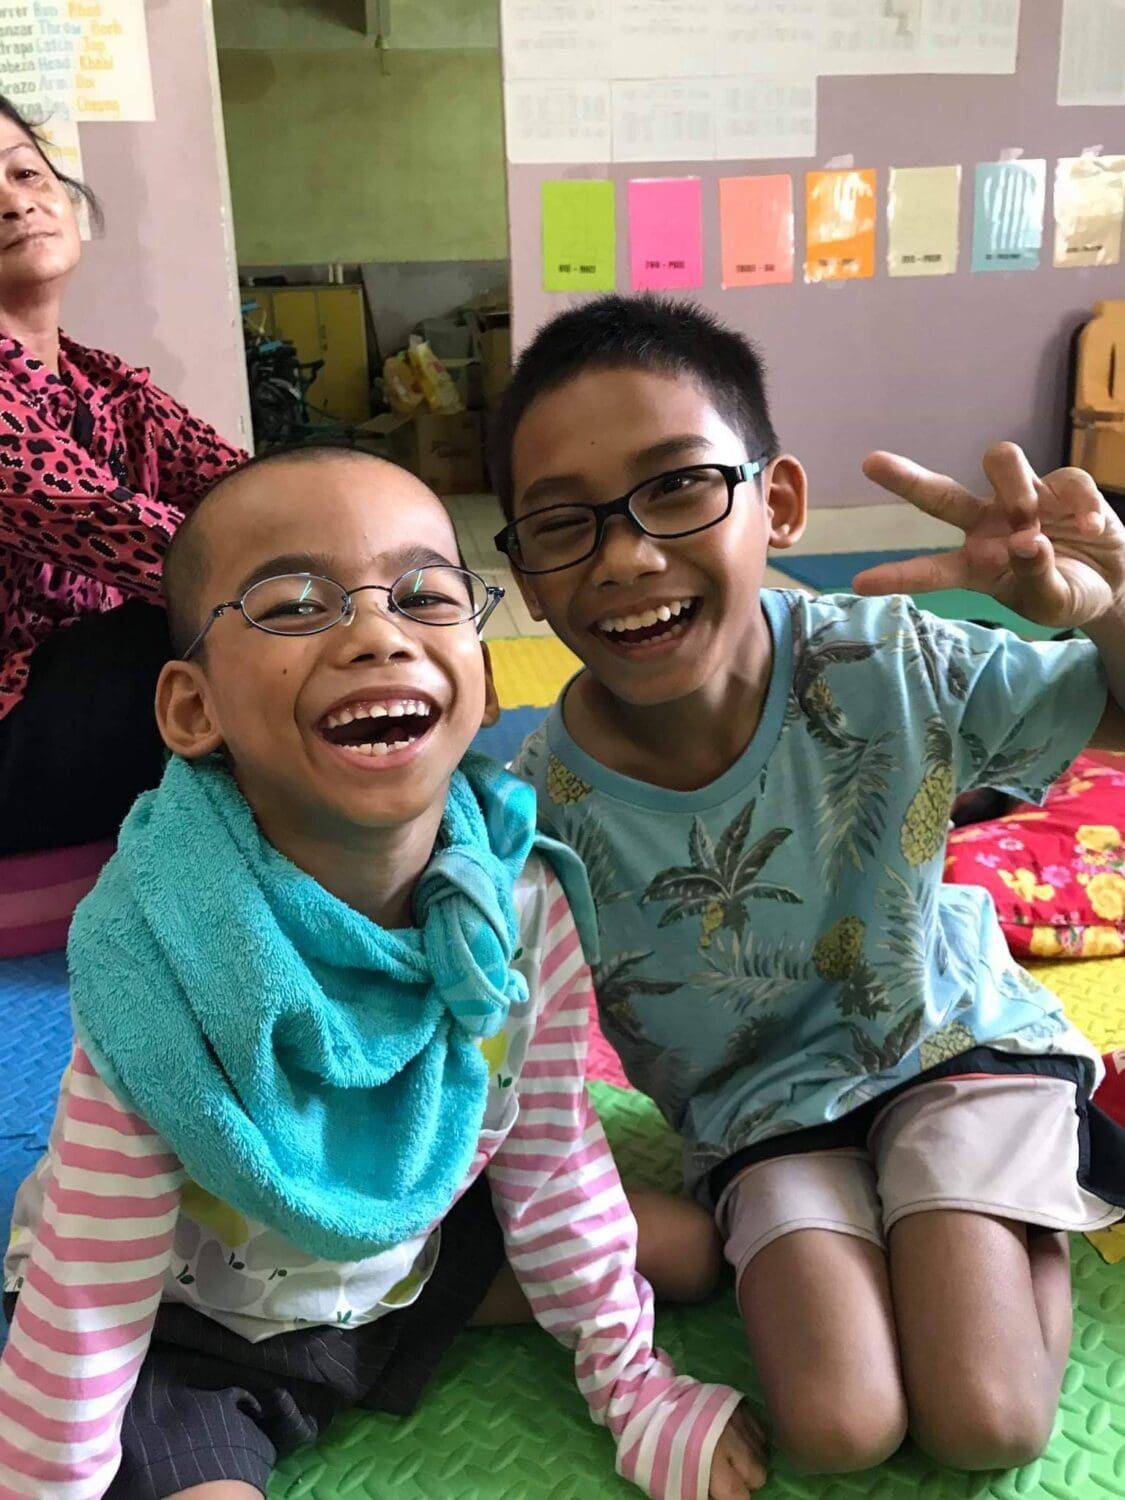 Chidren with disabilities in classroom in Nepal